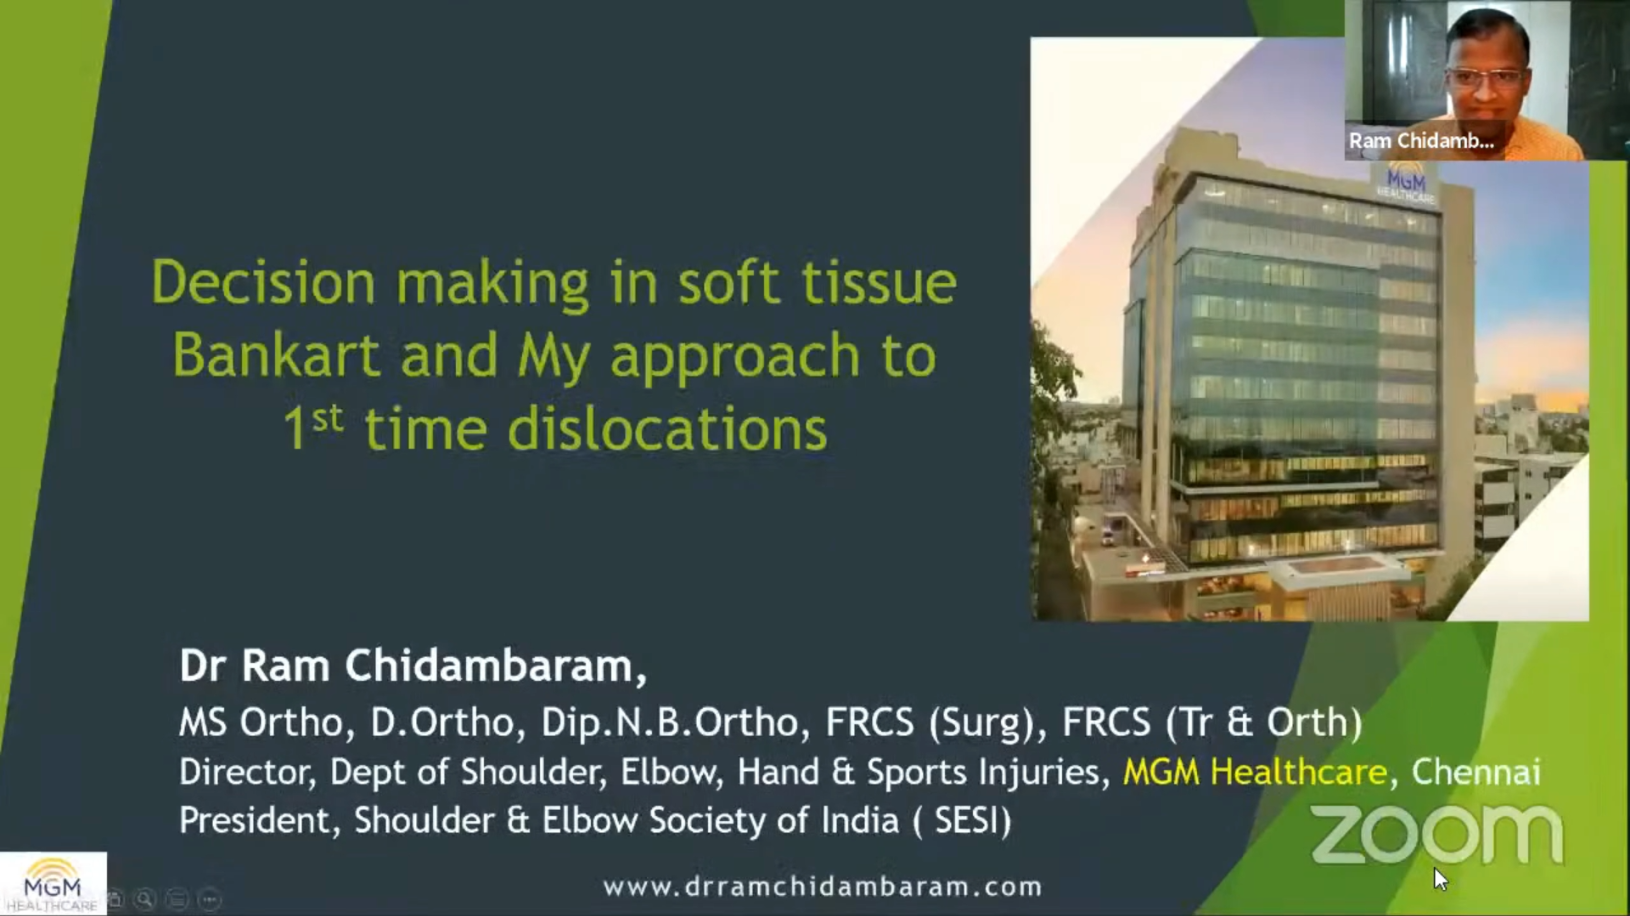 Decision Making in Soft Tissue Bankart and My Approach to 1st time dislocation Dr Ram Chidambaram MS Ortho, D. Ortho, Dip. N.B. Ortho, FRCS (Surg), FRCS (Tr & Orth) Director, Dept fo Shoulder, Elbow Hand and Sports Injuries, MGM Healthcare, Chennai, President, Shoulder & Elbow Society of India (SESI) OrthoTV : Orthopaedic Surgery & Rehabilitation Video & Webinars One Stop for Orthopaedic Video Lectures & Surgeries